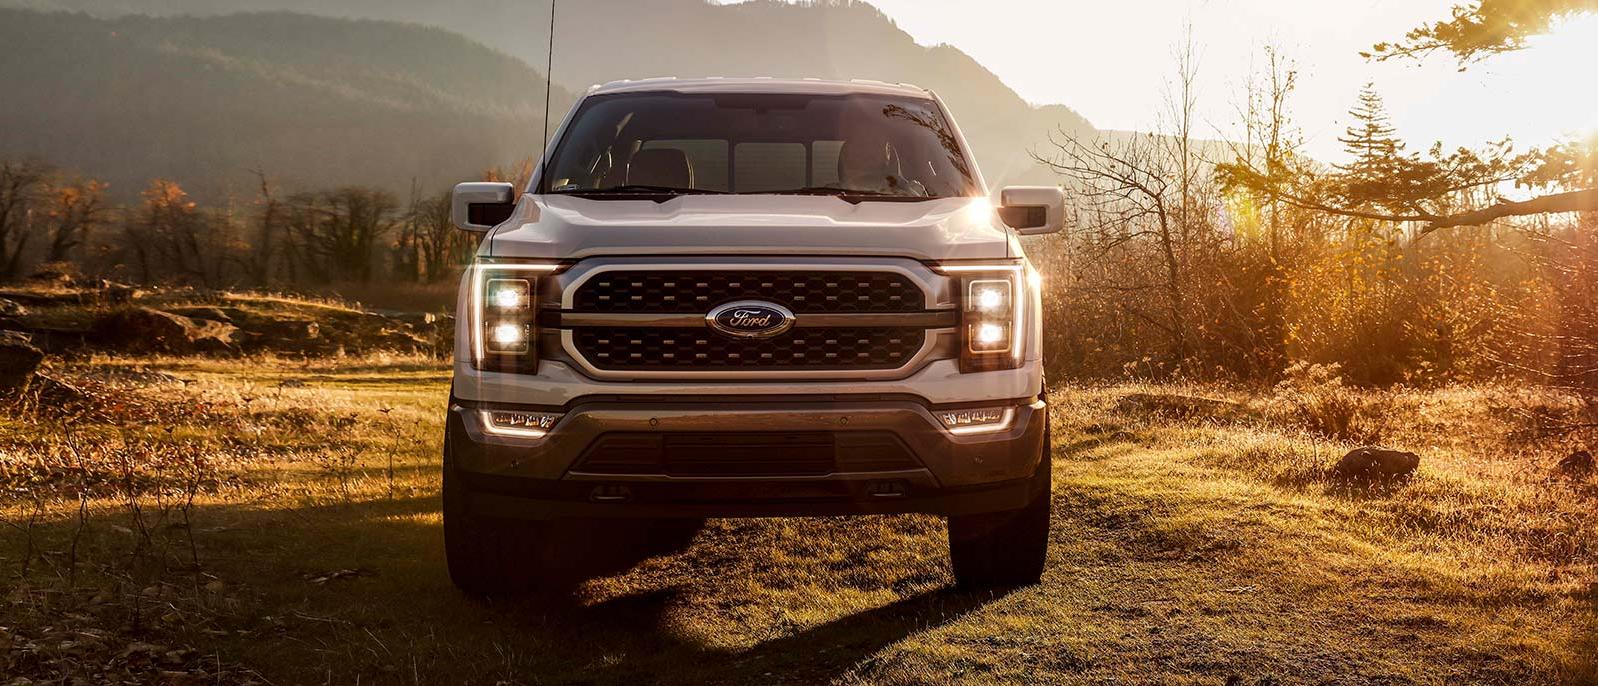 2022 Ford F-150 is parked in mountain region.